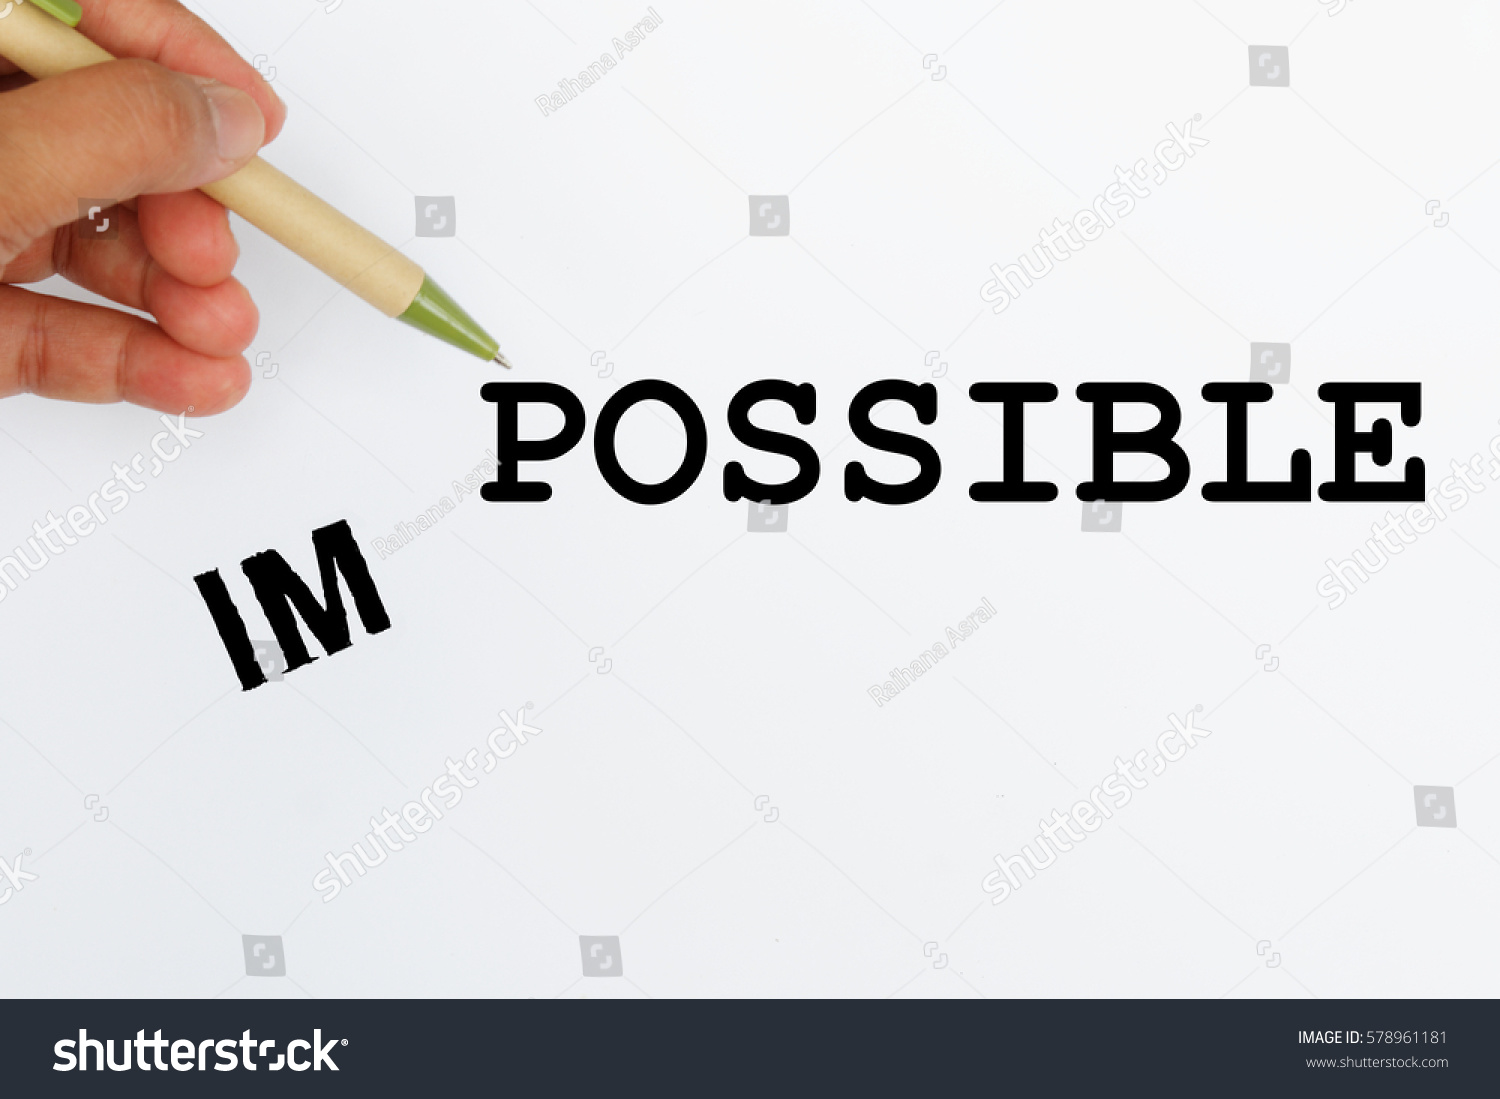 I and M falling to the left side leaving the word POSSIBLE, changing Impossible to Possible. Concept of possibility, confidence, positive, determination.  #578961181